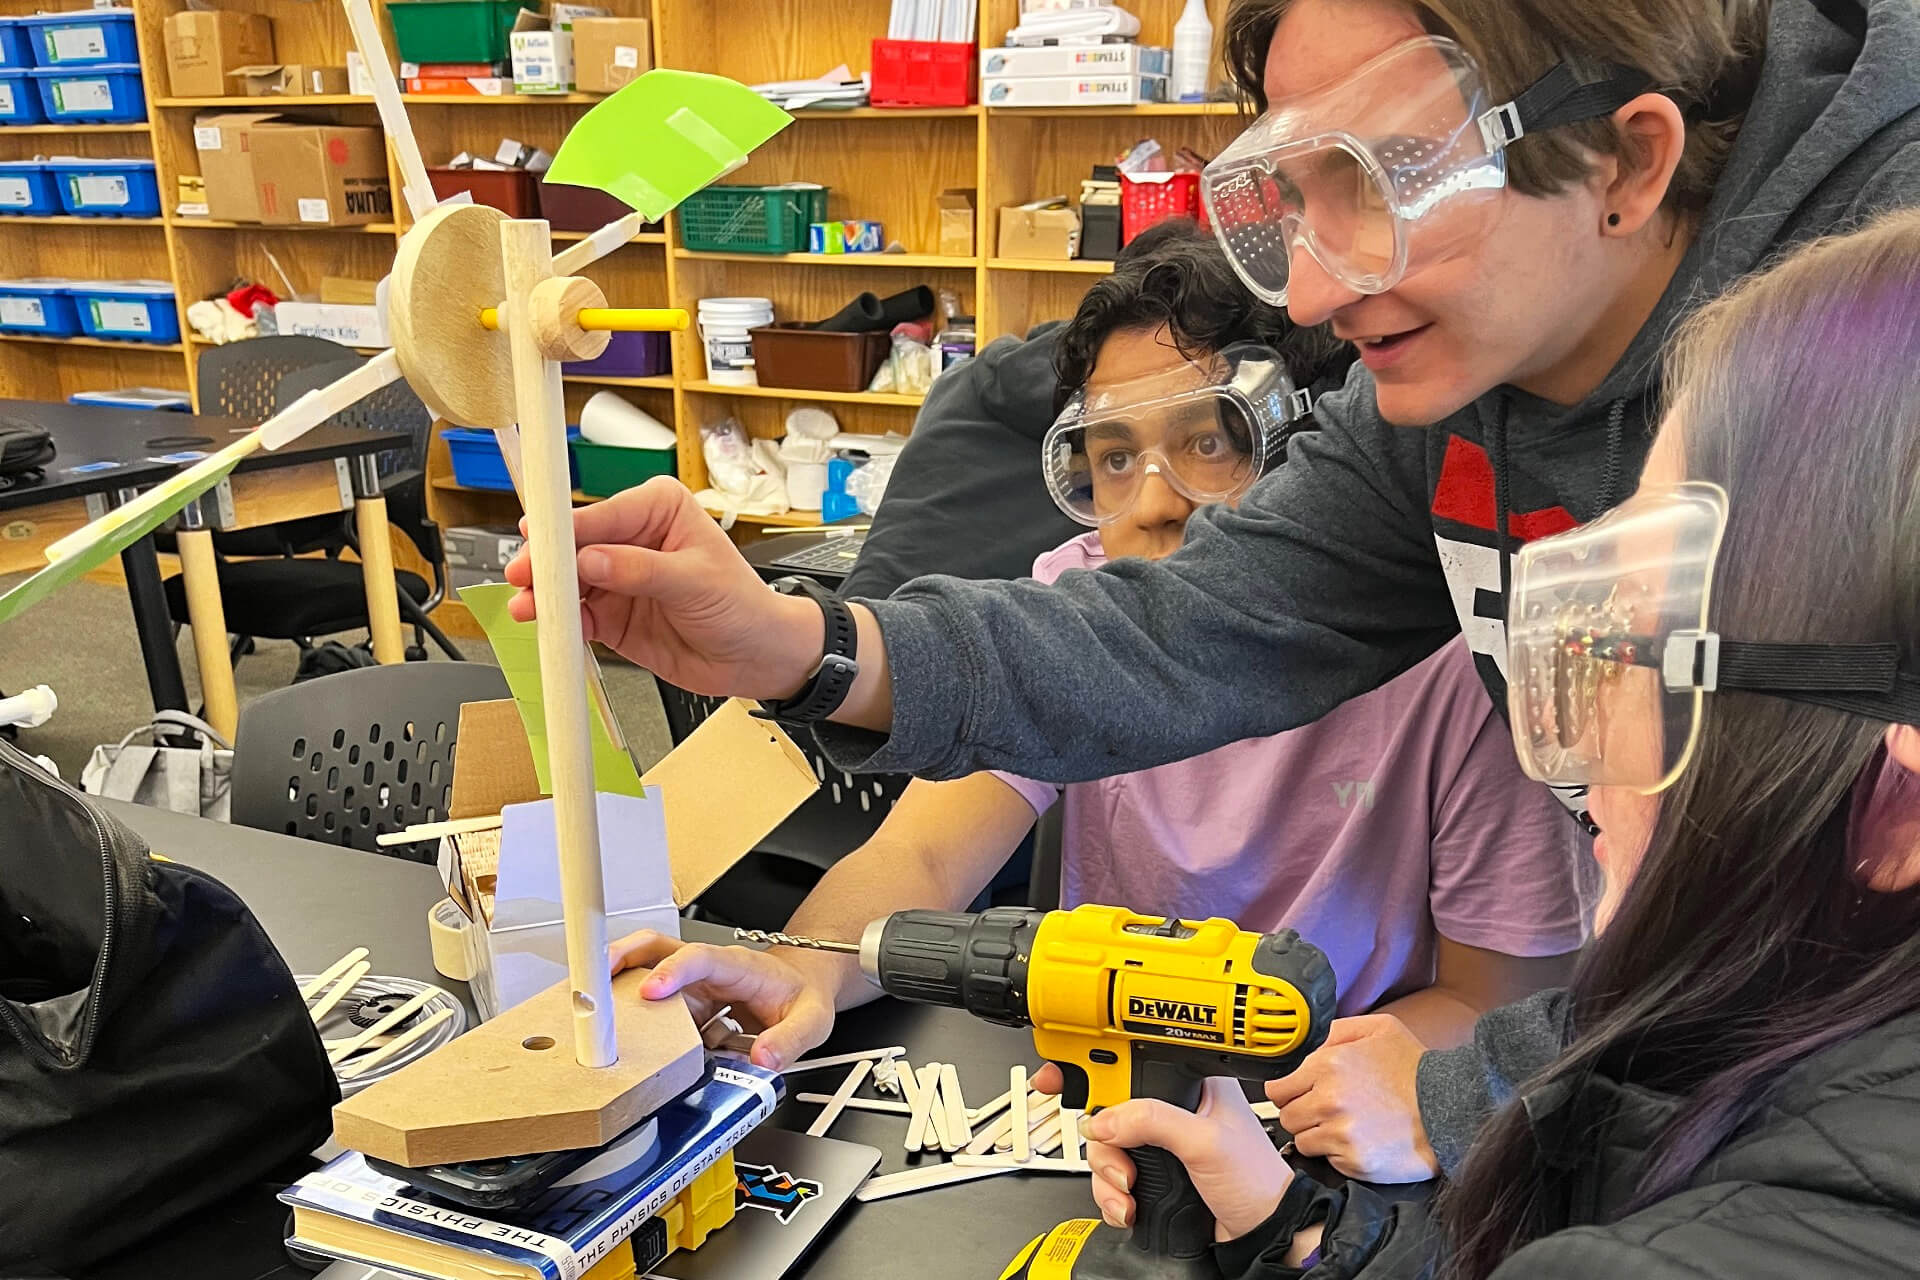 A teacher helping students who are working on building a wind indicator using wood and tools.